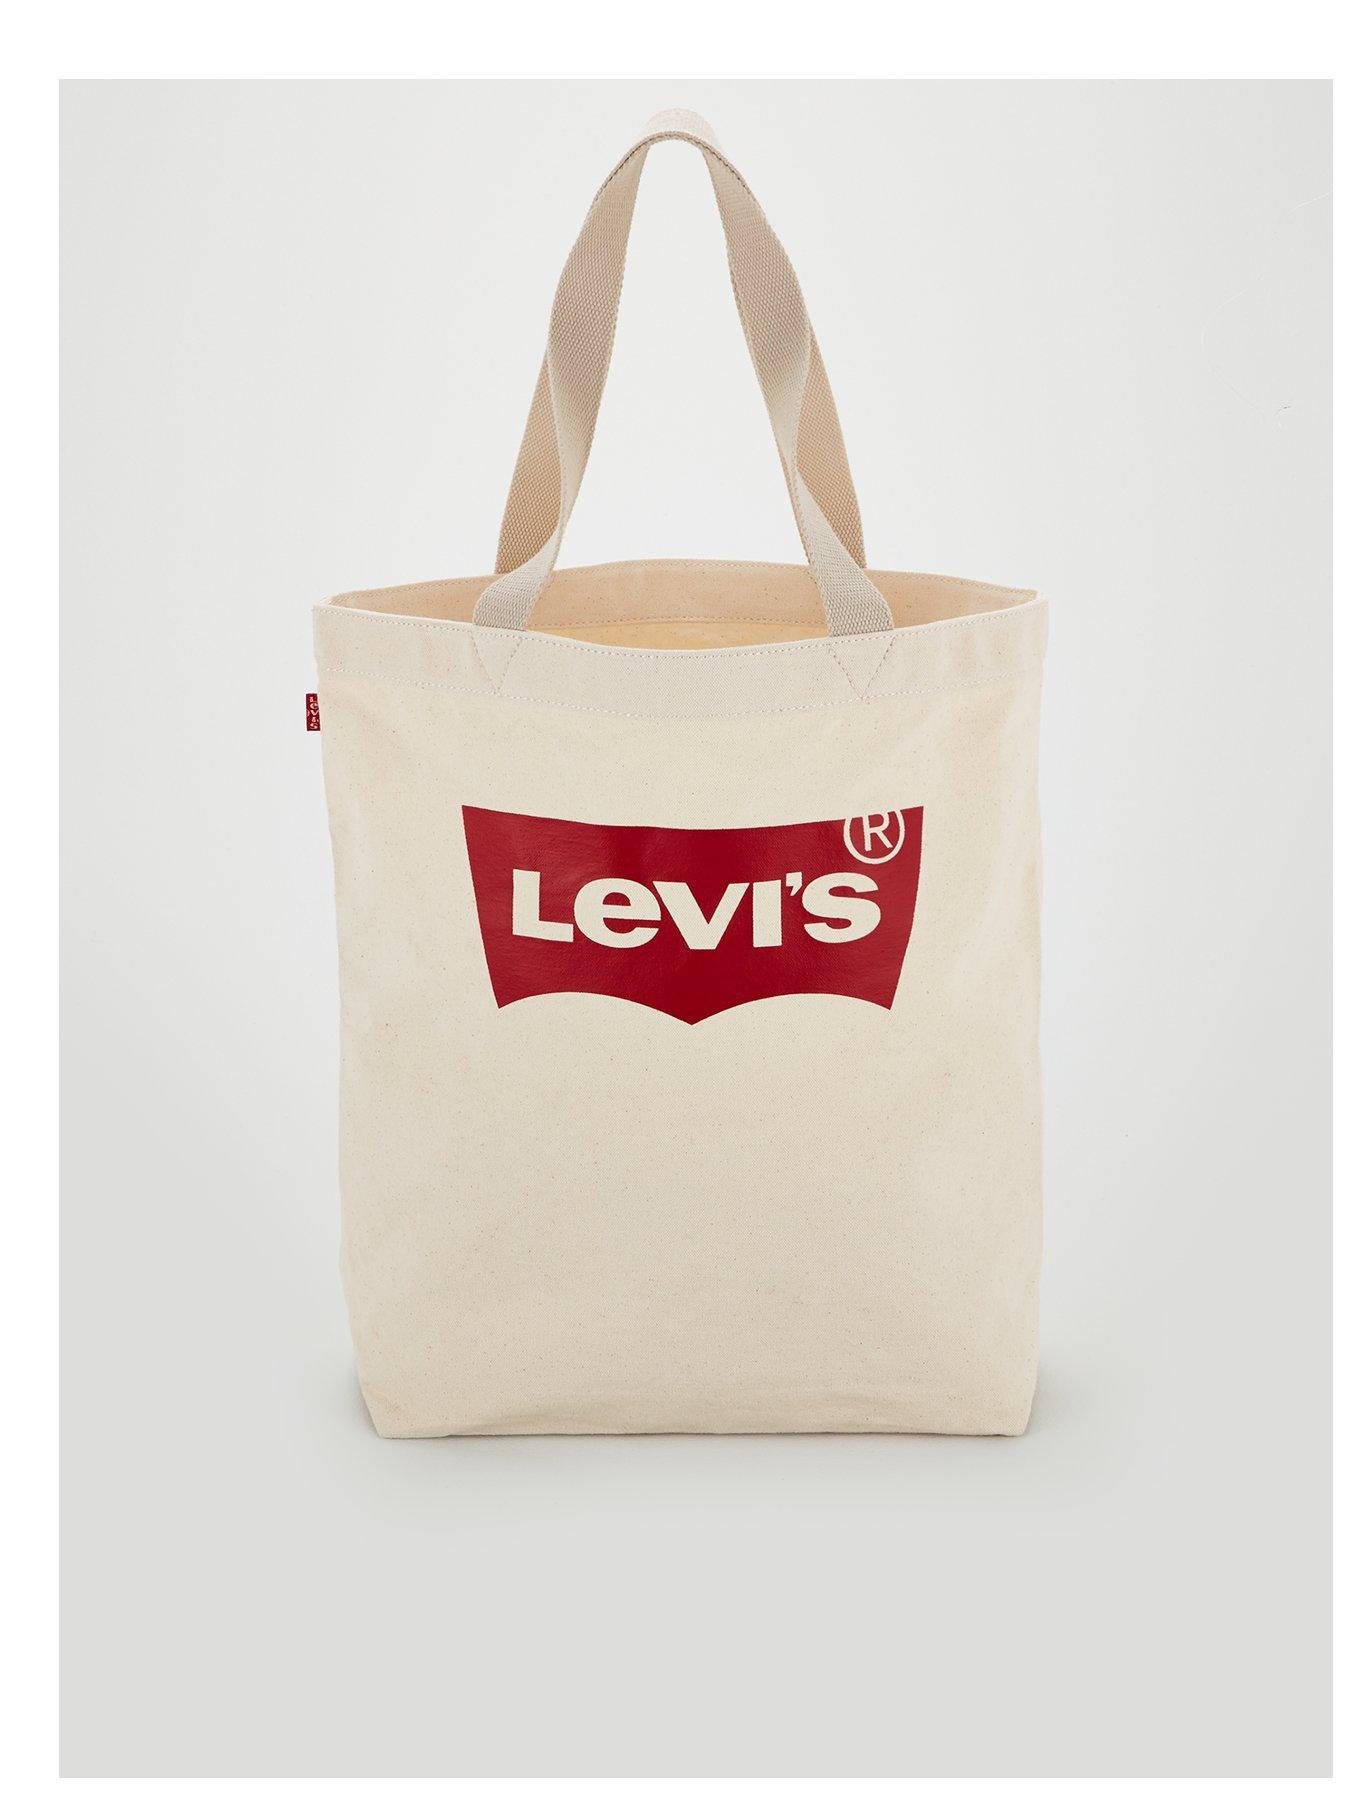 Levi's Levis Womens Batwing Tote Bag | very.co.uk